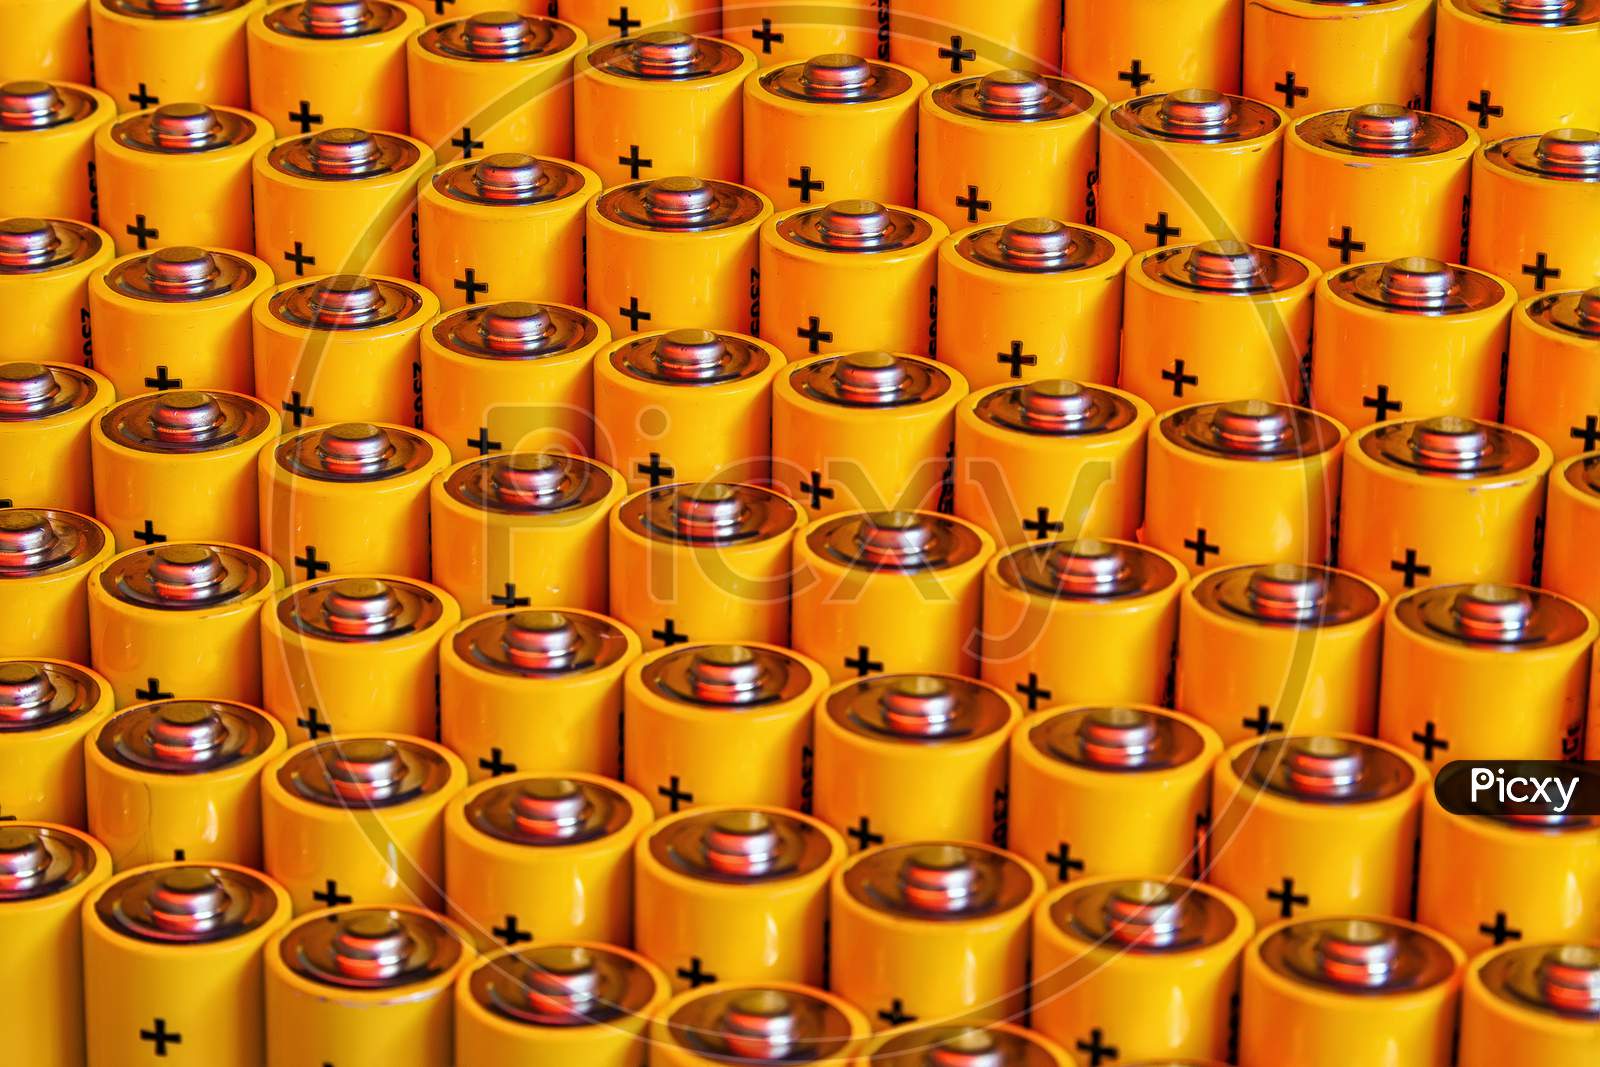 Close View Of Batteries Alkaline 1.5 Volts In Size Aa Several Batteries In Rows.A Close-Up Of The Same Yellow Batteries, Lined Up In Even Rows By Positive Charges. An Unsafe Way To Use Energy.